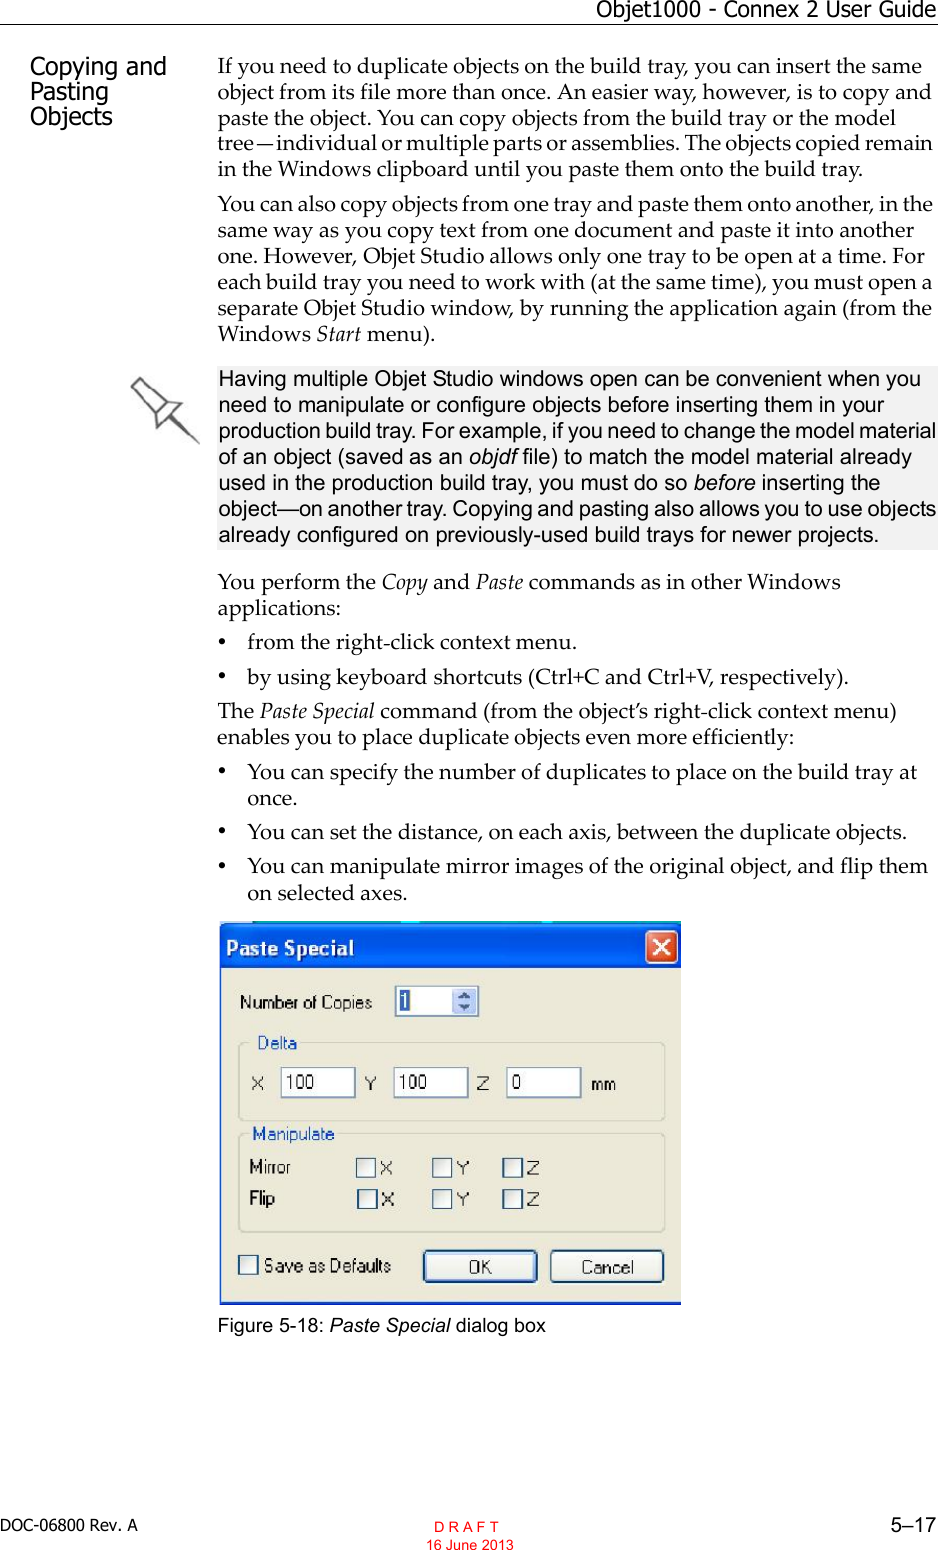 DOC-06800 Rev. A 5–17Objet1000 - Connex 2 User GuideCopying and Pasting ObjectsIf you need to duplicate objects on the build tray, you can insert the sameobject from its file more than once. An easier way, however, is to copy andpaste the object. You can copy objects from the build tray or the modeltreeindividual or multiple parts or assemblies. The objects copied remainin the Windows clipboard until you paste them onto the build tray.You can also copy objects from one tray and paste them onto another, in thesame way as you copy text from one document and paste it into anotherone. However, Objet Studio allows only one tray to be open at a time. Foreach build tray you need to work with (at the same time), you must open aseparate Objet Studio window, by running the application again (from theWindows Start menu).You perform the Copy and Paste commands as in other Windowsapplications:•from the right click context menu.•by using keyboard shortcuts (Ctrl+C and Ctrl+V, respectively).The Paste Special command (from the objects right click context menu)enables you to place duplicate objects even more efficiently:•You can specify the number of duplicates to place on the build tray atonce.•You can set the distance, on each axis, between the duplicate objects.•You can manipulate mirror images of the original object, and flip themon selected axes.Figure 5-18: Paste Special dialog boxHaving multiple Objet Studio windows open can be convenient when you need to manipulate or configure objects before inserting them in your production build tray. For example, if you need to change the model material of an object (saved as an objdf file) to match the model material already used in the production build tray, you must do so before inserting the object—on another tray. Copying and pasting also allows you to use objects already configured on previously-used build trays for newer projects.  D R A F T 16 June 2013